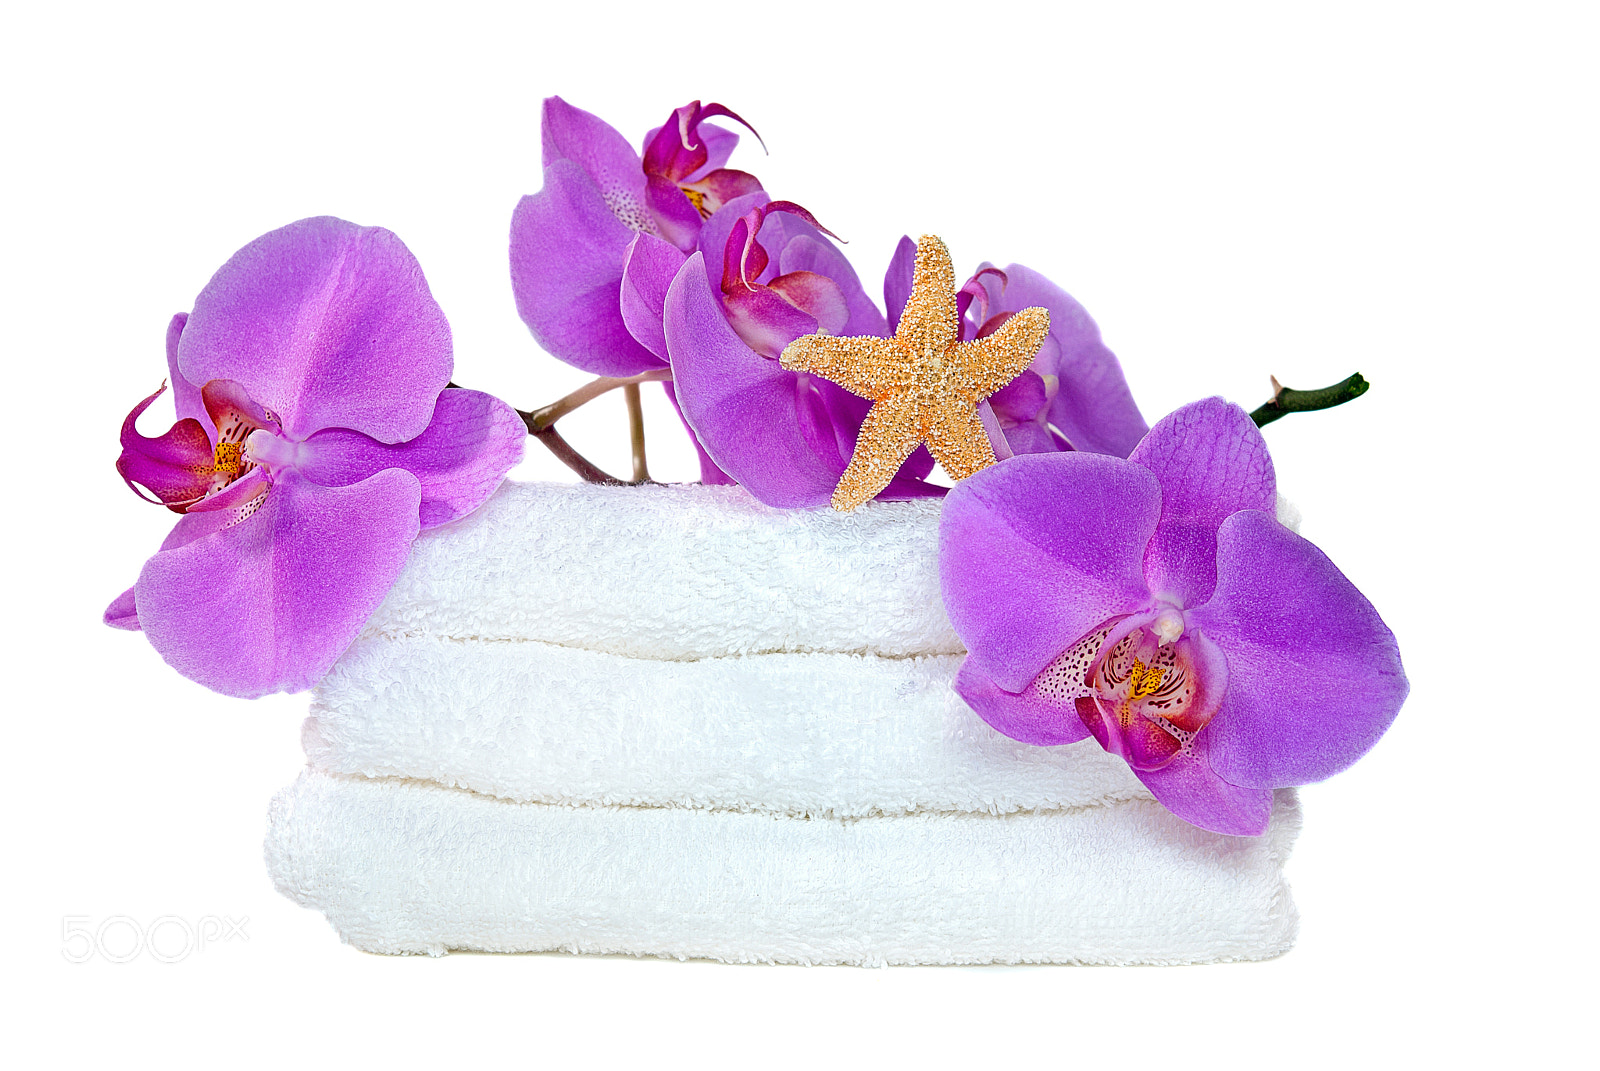 Nikon D80 + Nikon AF-S Micro-Nikkor 60mm F2.8G ED sample photo. Orchids and starfish on towels photography